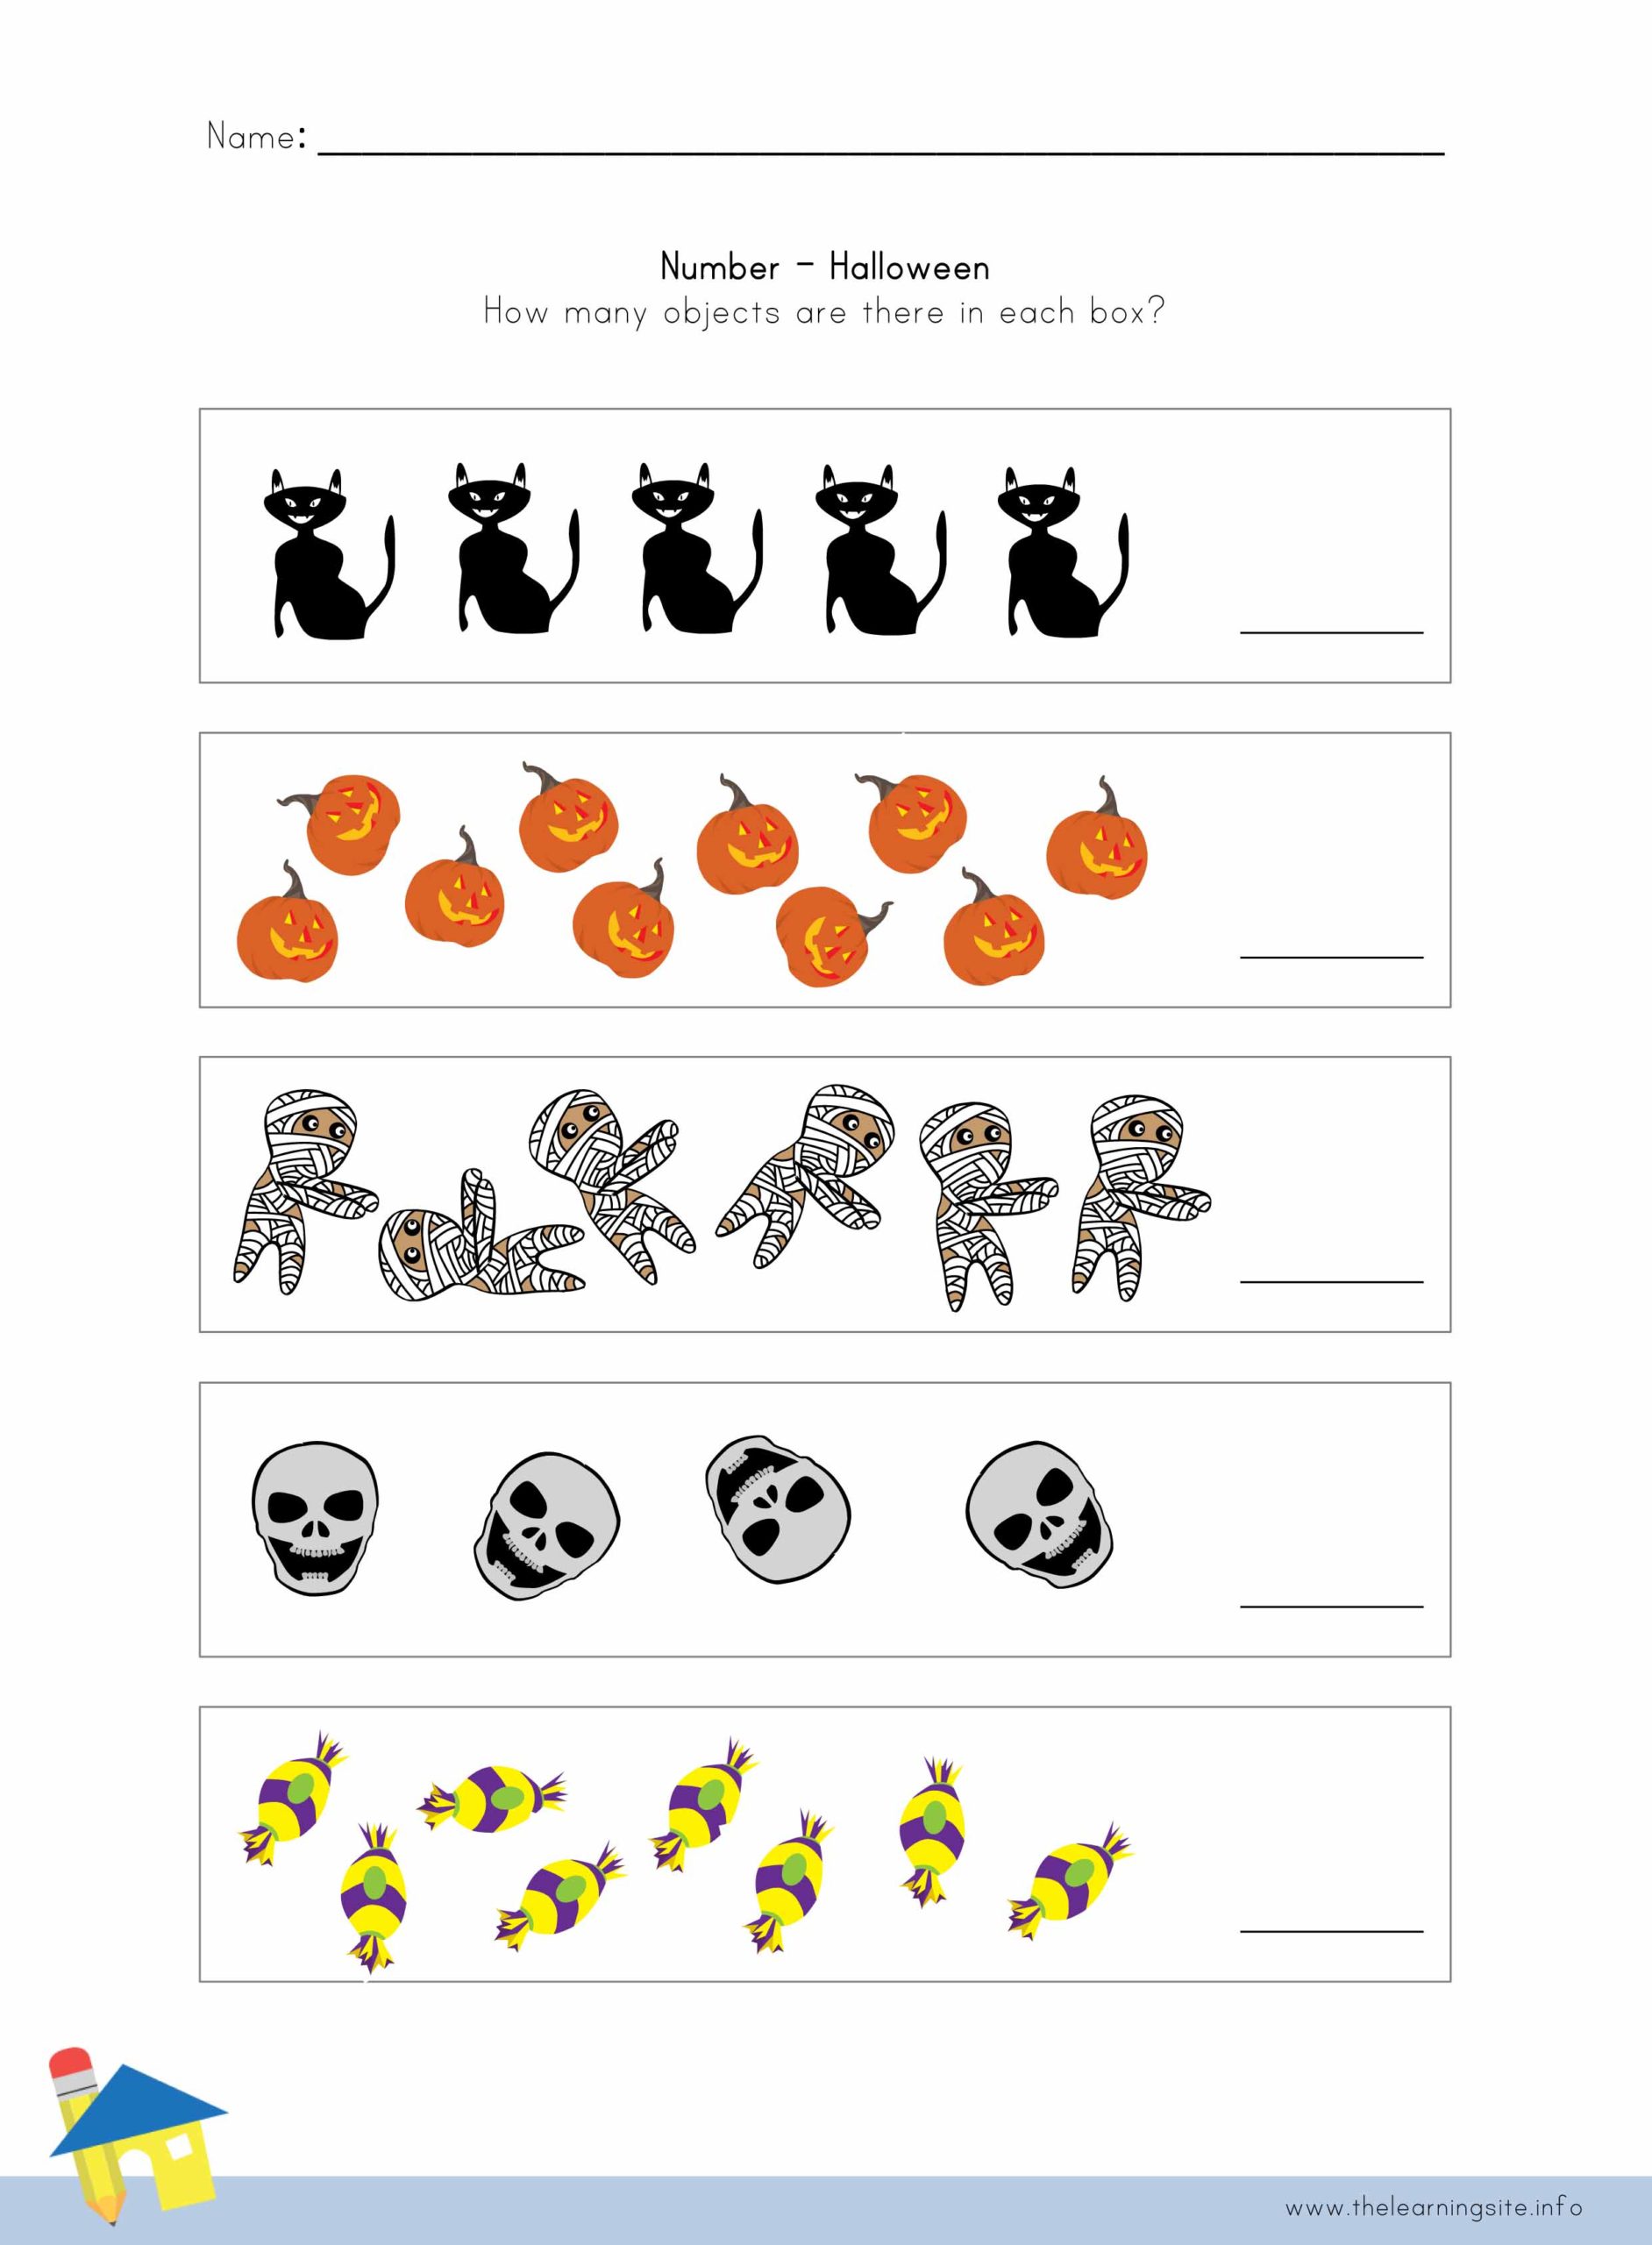 halloween-number-worksheet-1-the-learning-site